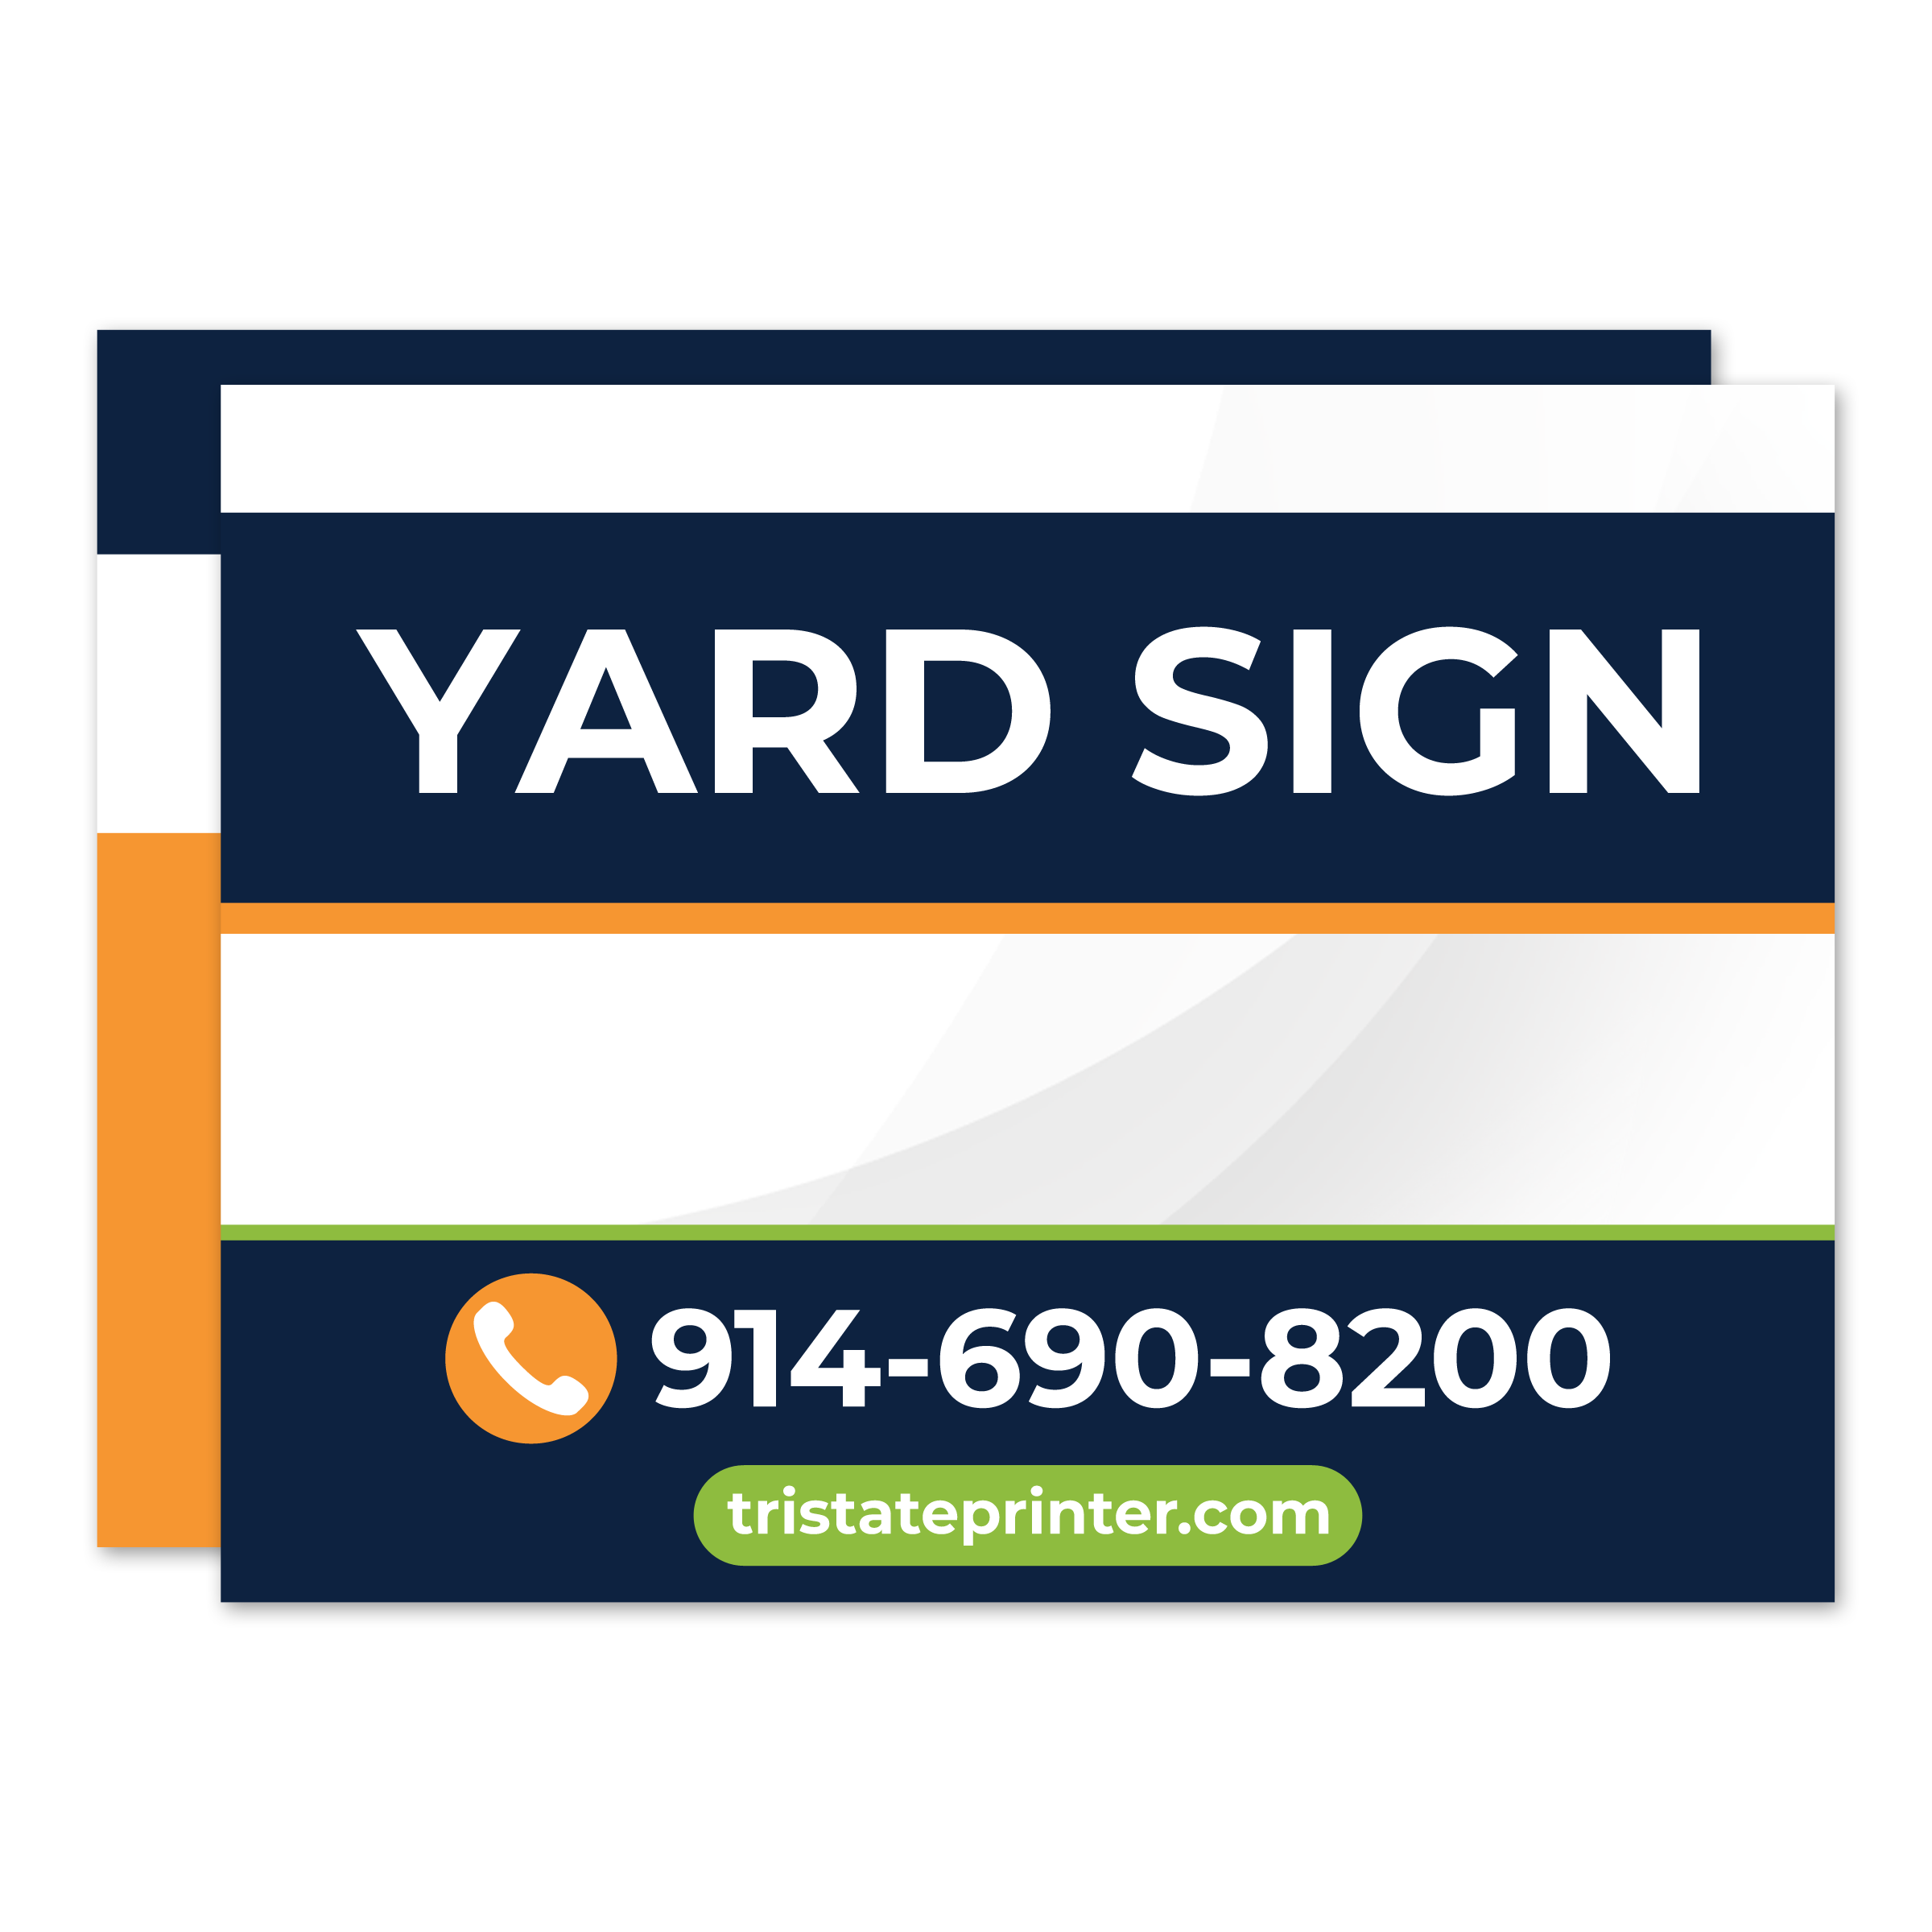 24 by 36 Yard Sign